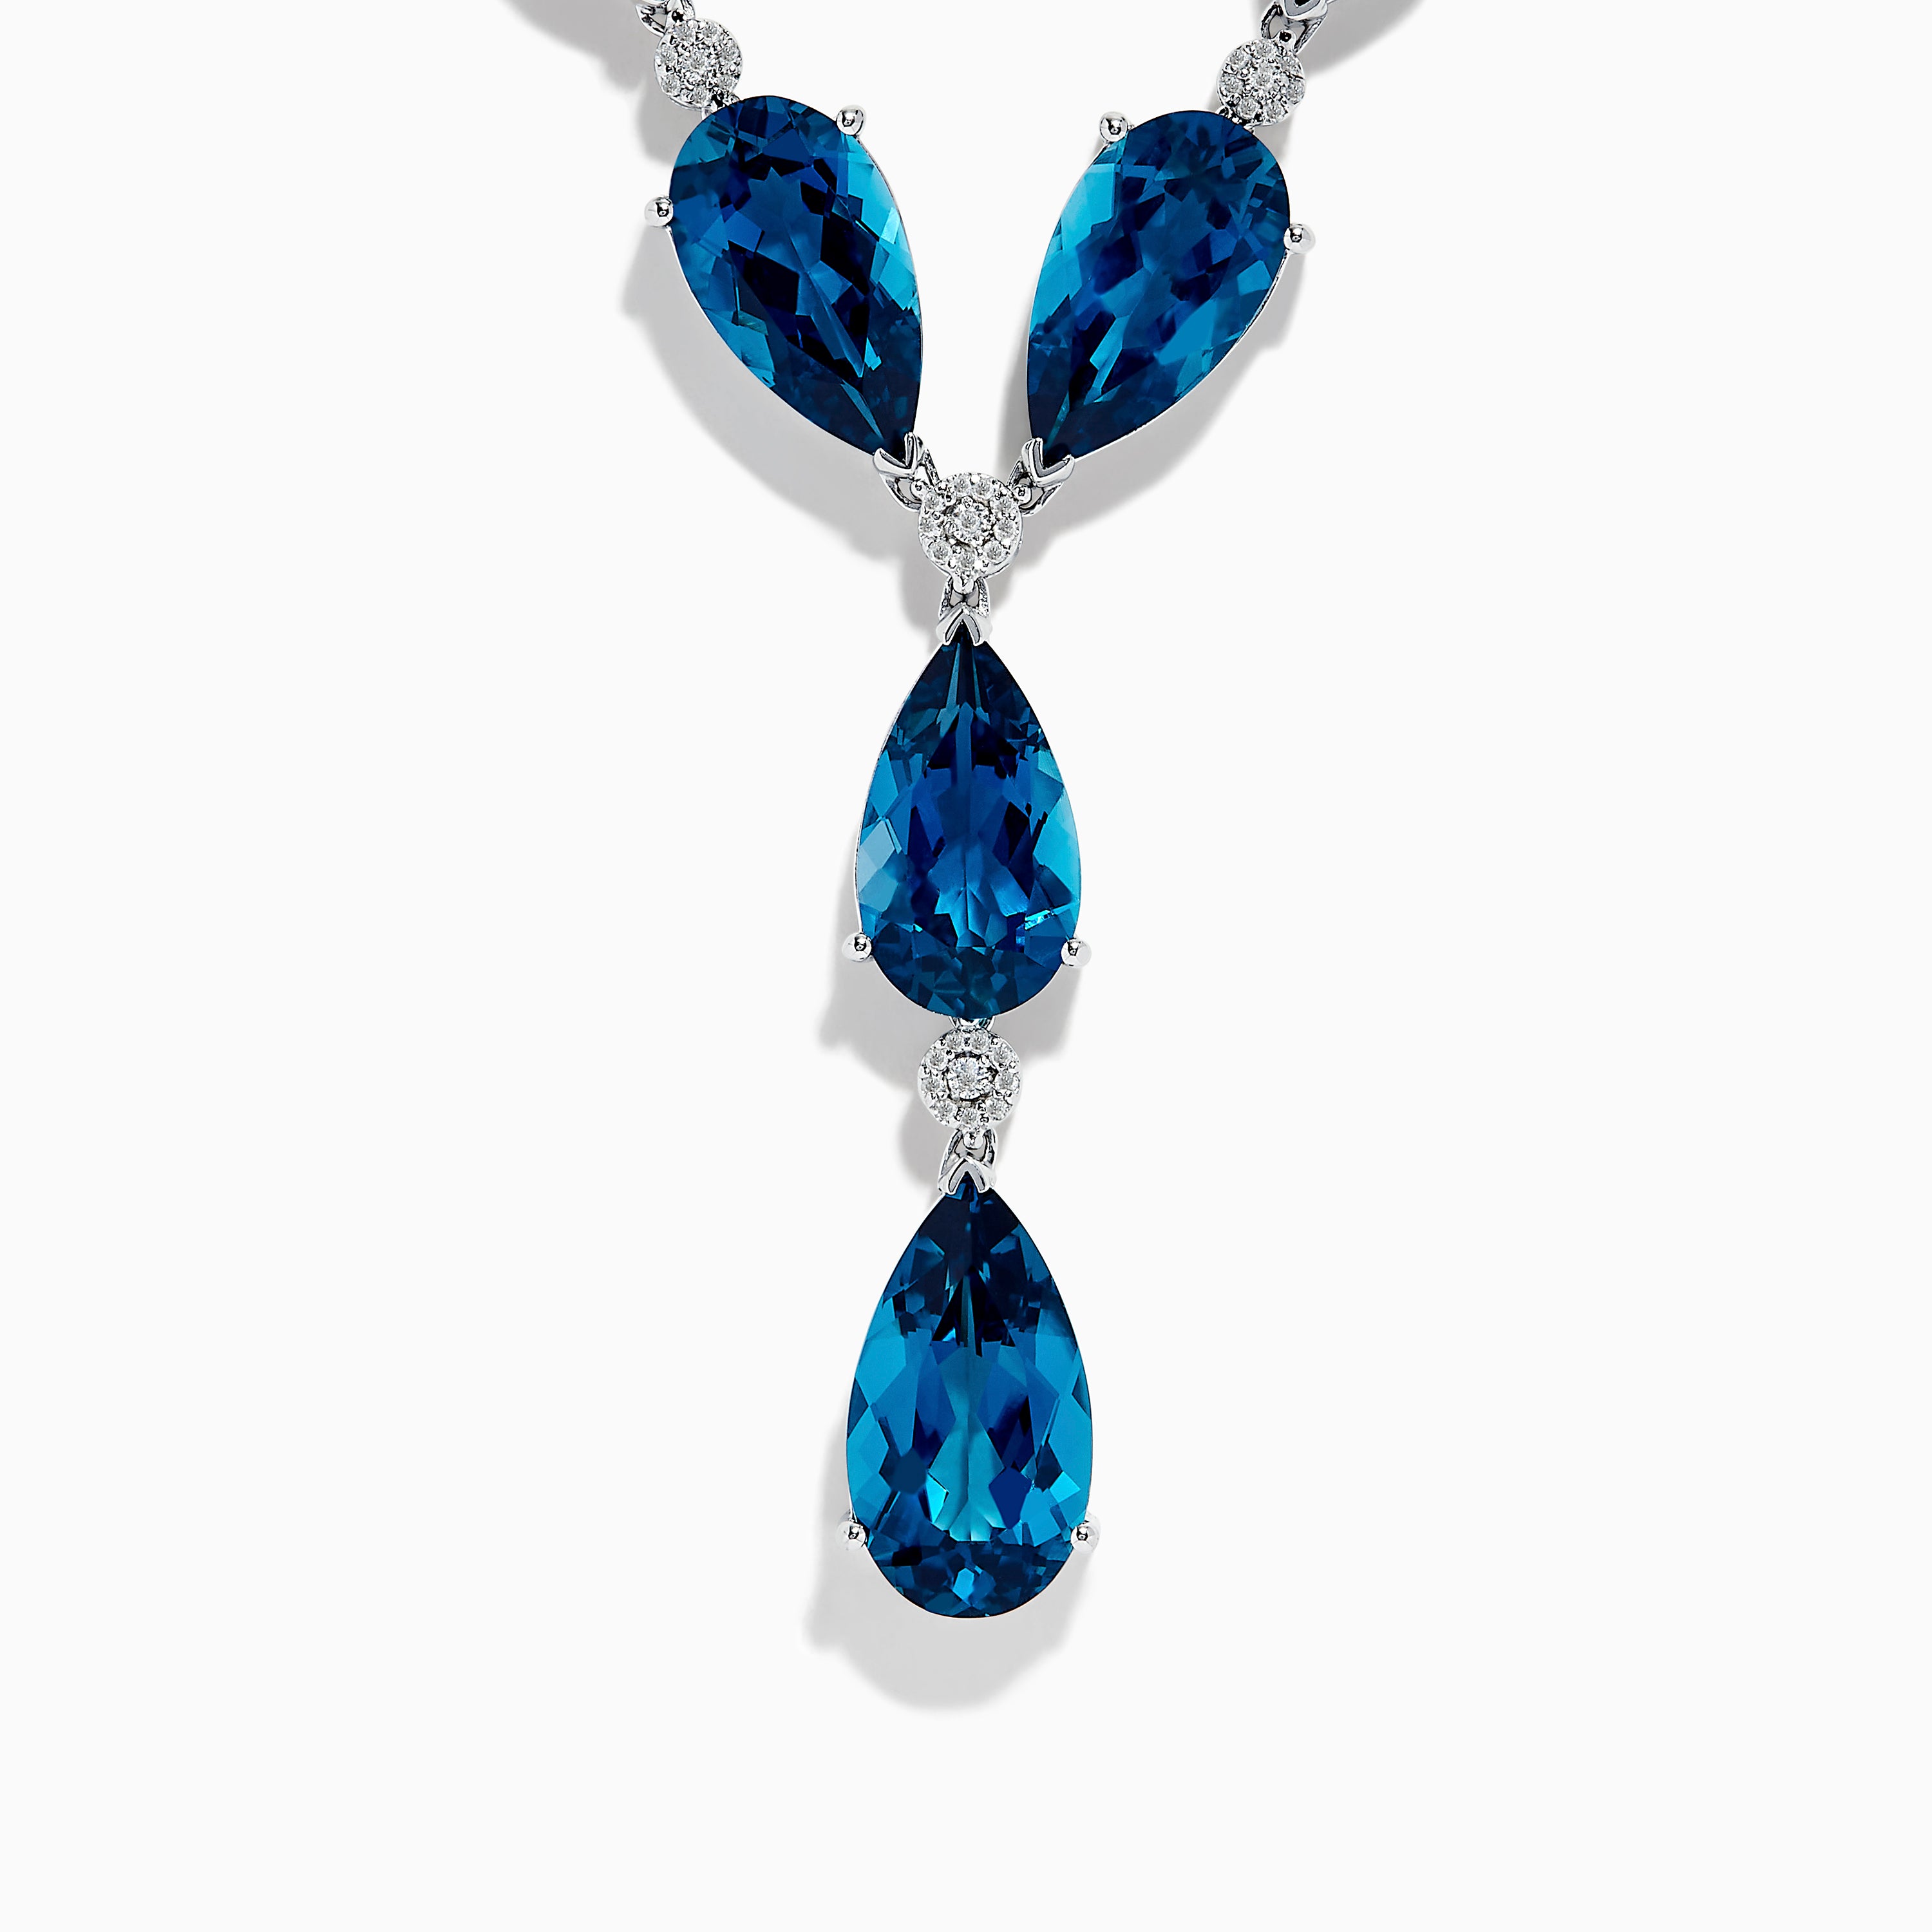 13.00 Carat London Blue Topaz Pendant Necklace with Diamond Accents in  Sterling Silver | Ross-Simons